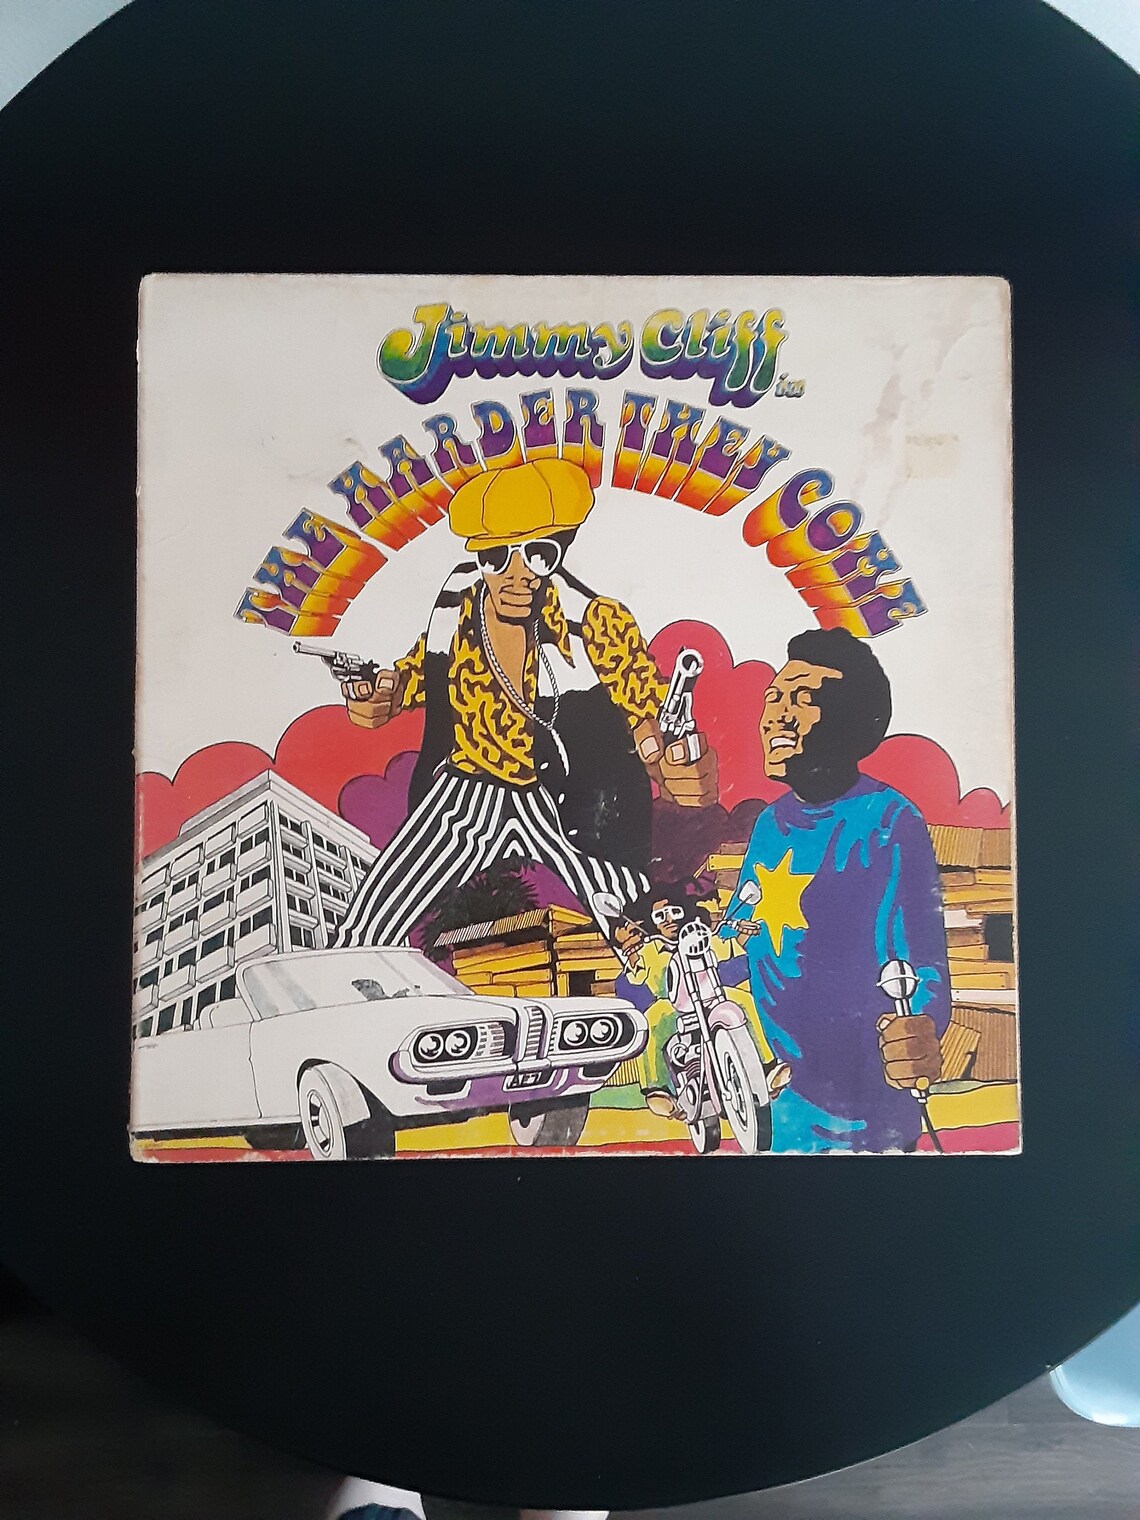 1973 Jimmy Cliff The Harder They Come Soundtrack Vinyl Mango | Etsy